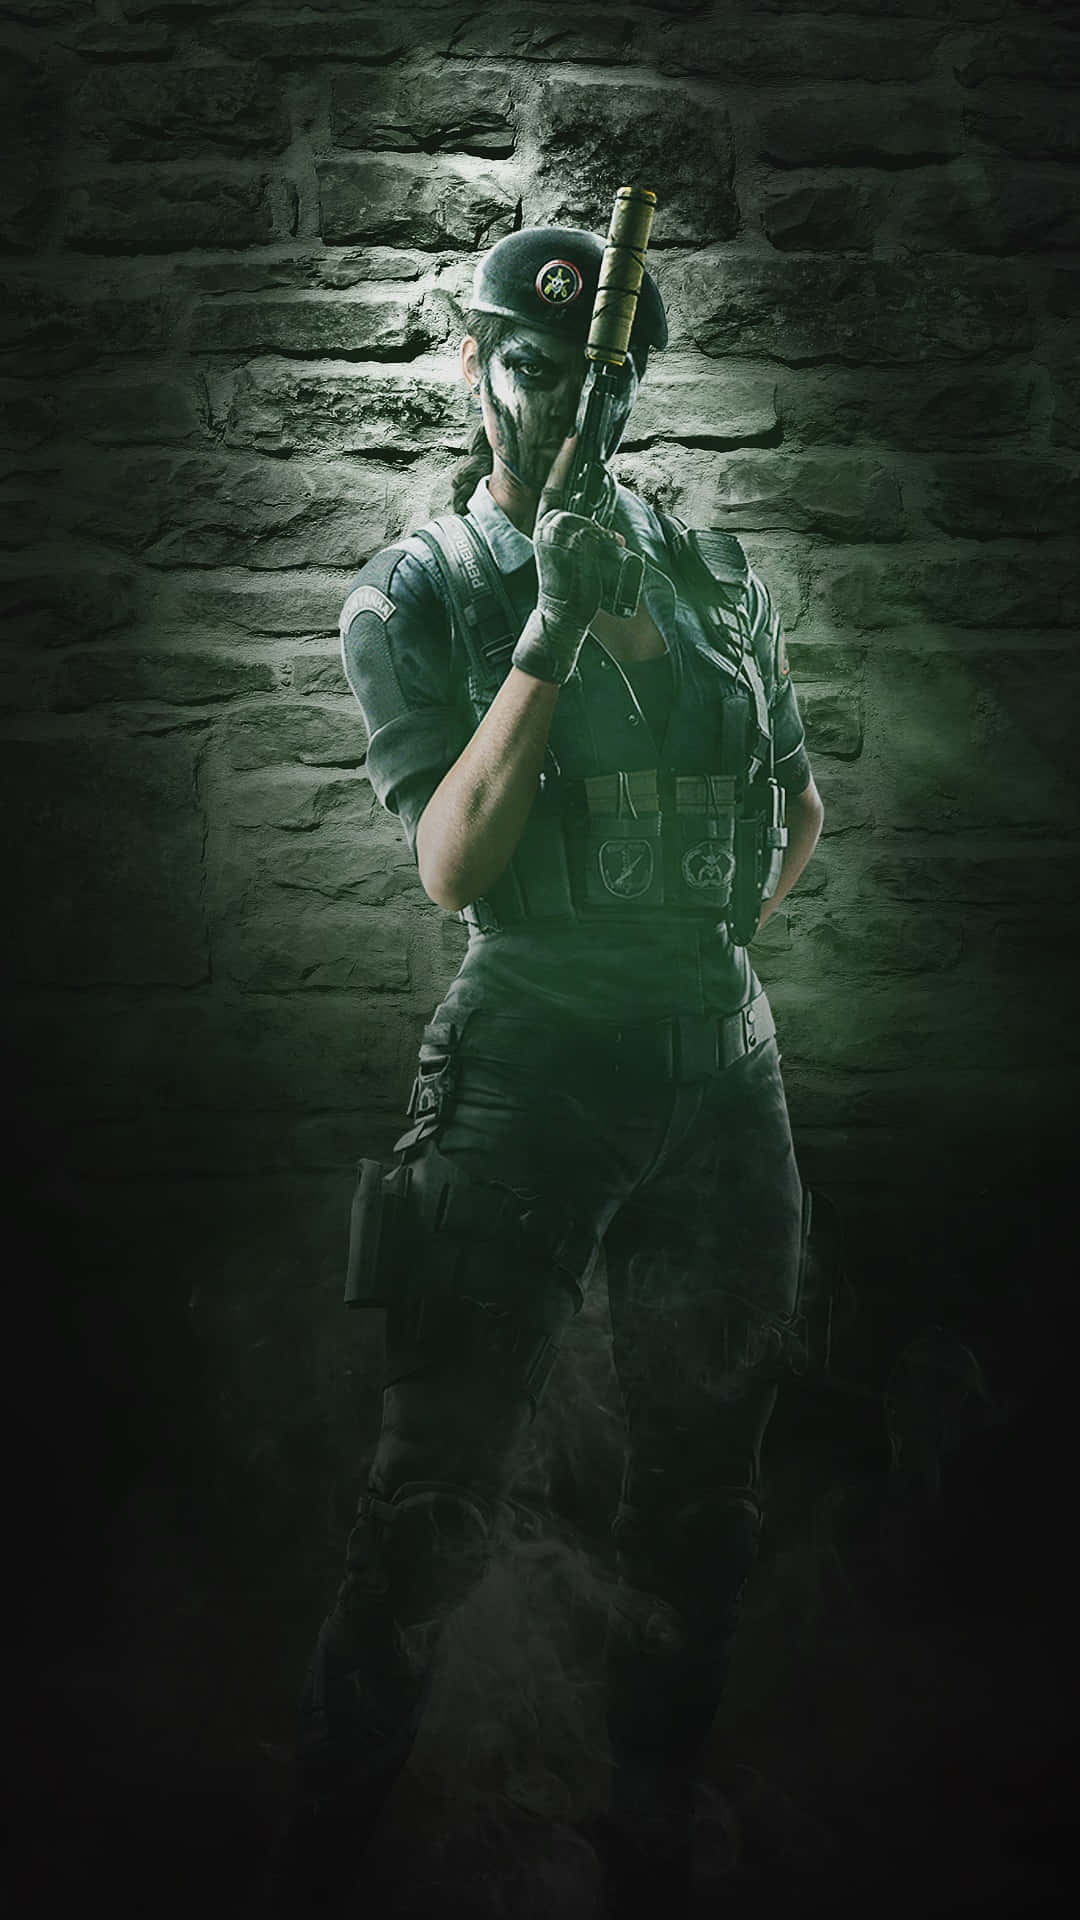 Caveira from Rainbow Six Siege in Stealth Mode Wallpaper